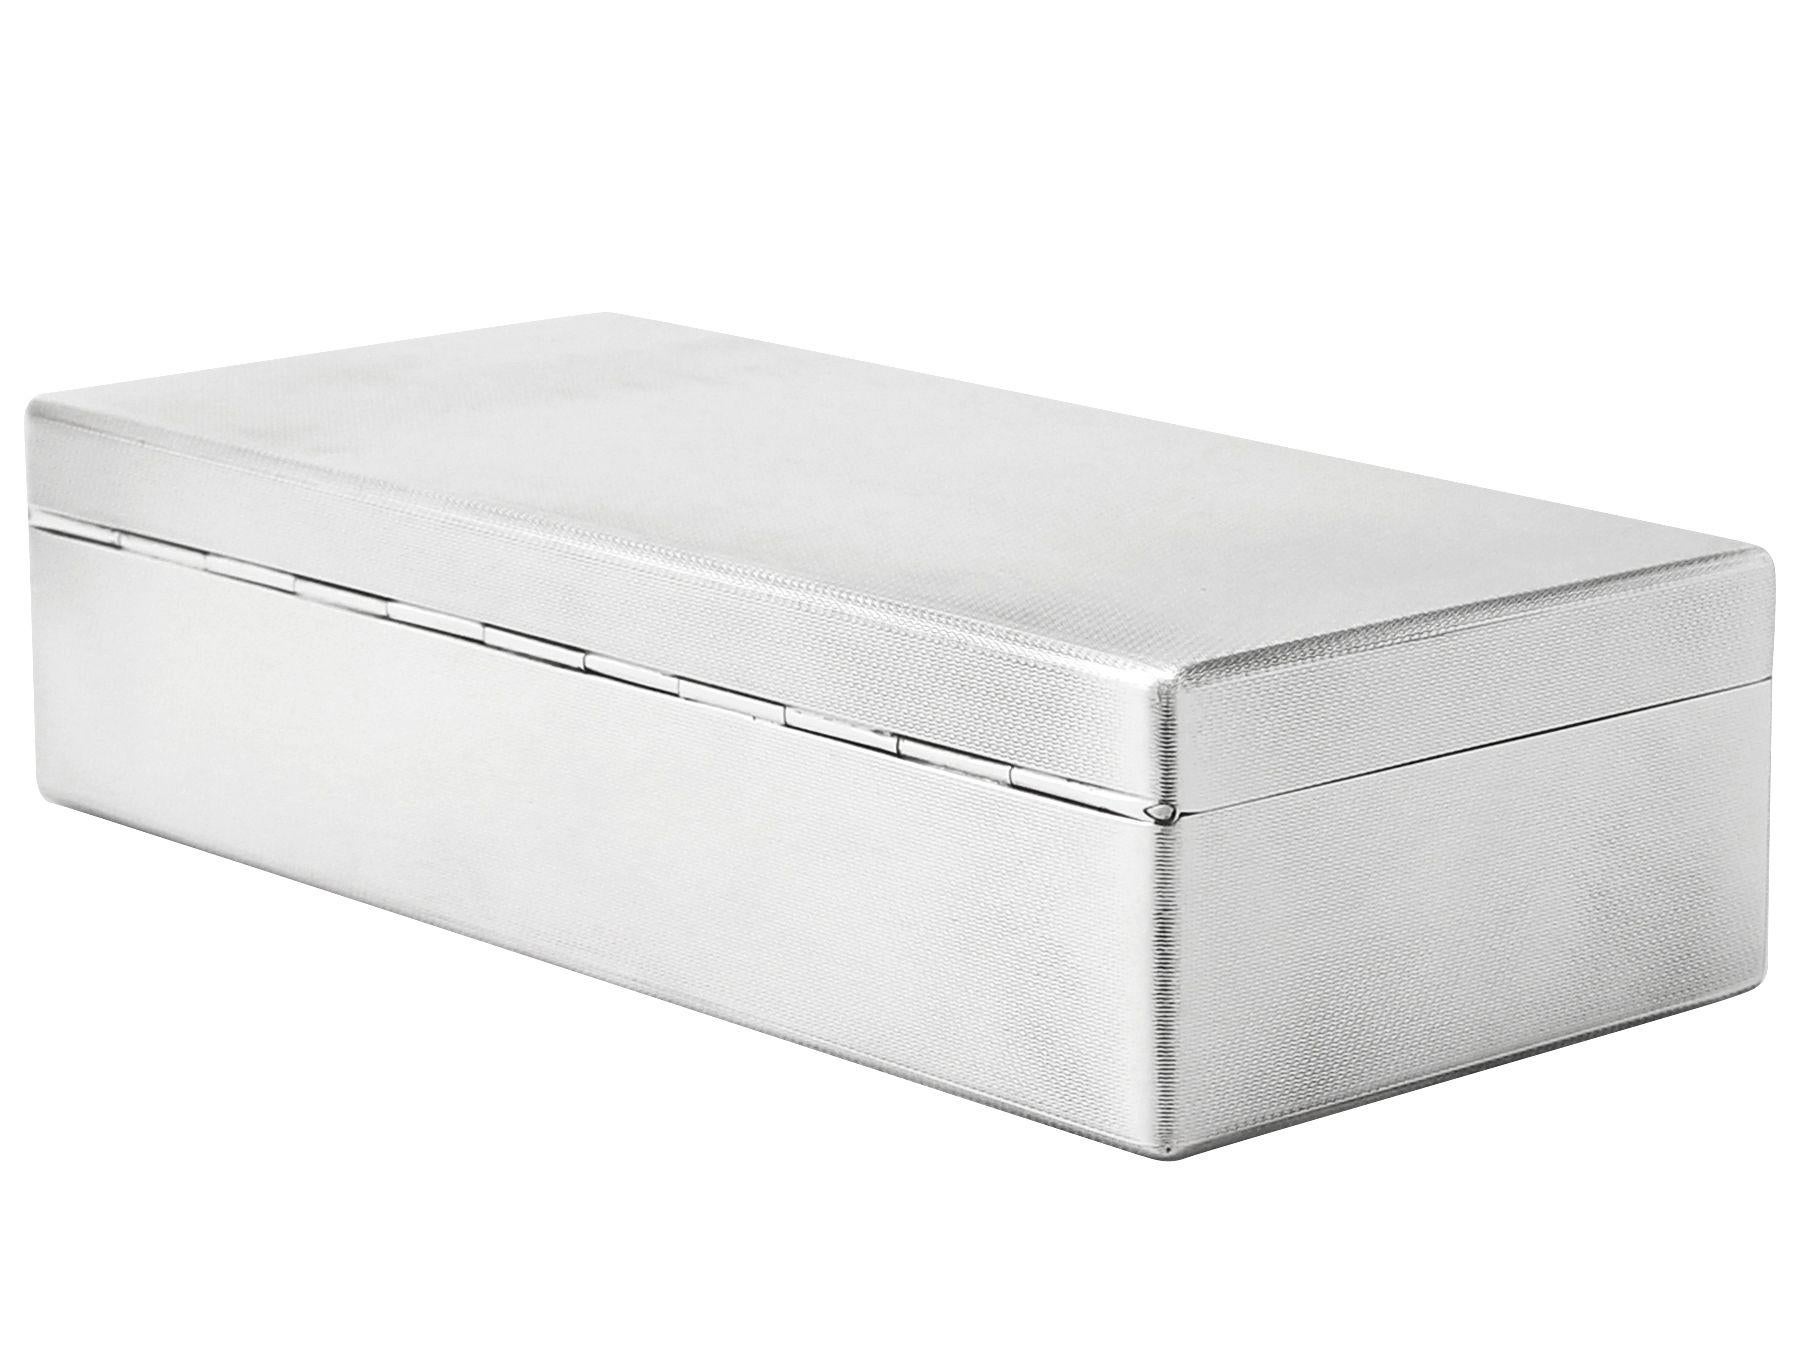 An exceptional, fine and impressive vintage George VI English sterling silver box; an addition to our ornamental silverware collection.

This exceptional vintage George VI sterling silver box has a rectangular form with rounded corners.

The